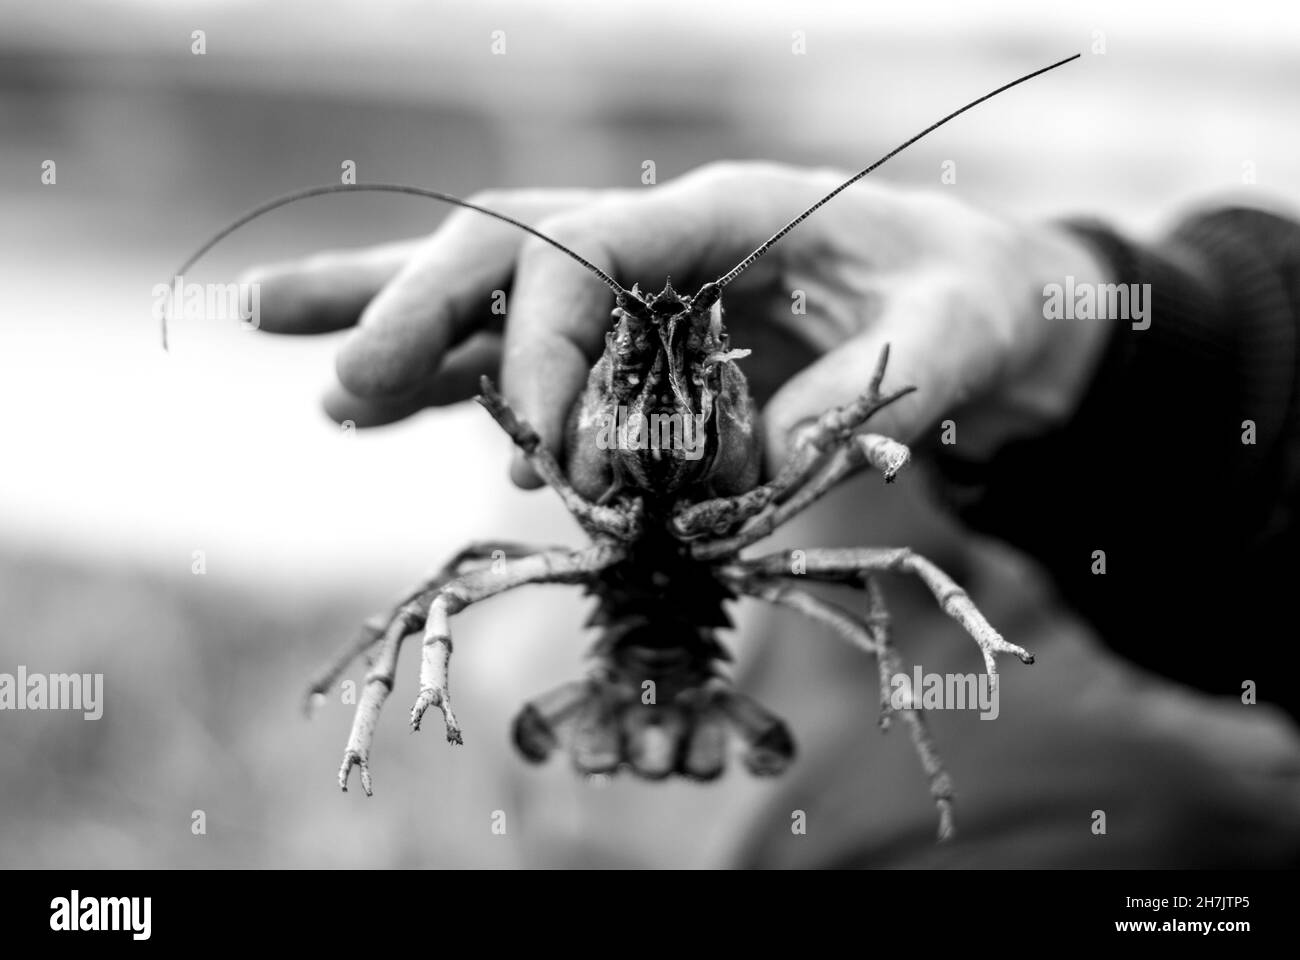 Face to face with a crayfish in BW. A species of crab native to fresh water rivers. Held in hand. Stock Photo